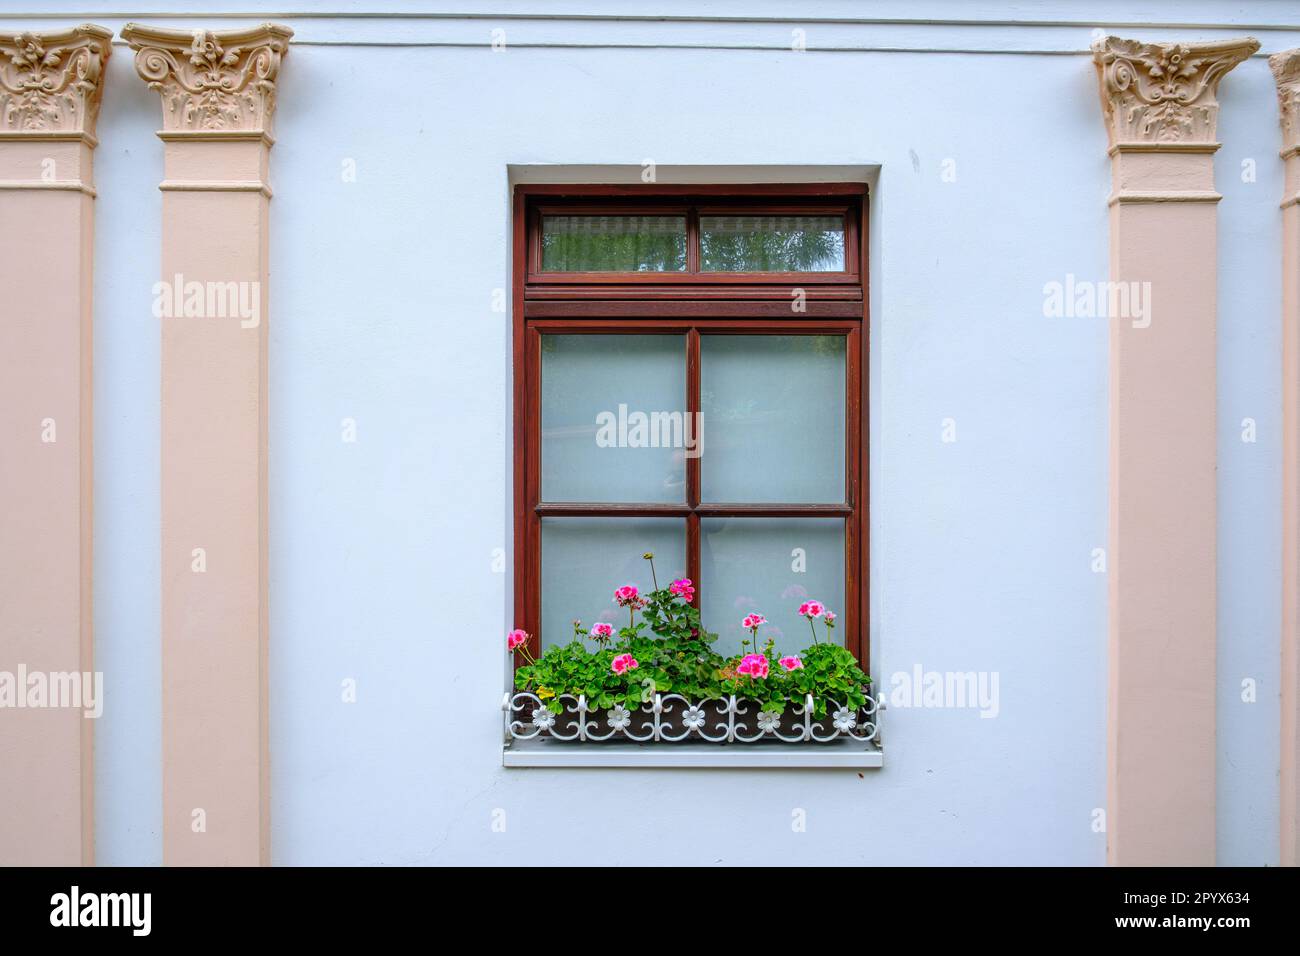 Window of a noble architecture decorated with flowers in the villa district of Sassnitz, Mecklenburg-Western Pomerania, Rugen Island, Germany, Europe. Stock Photo